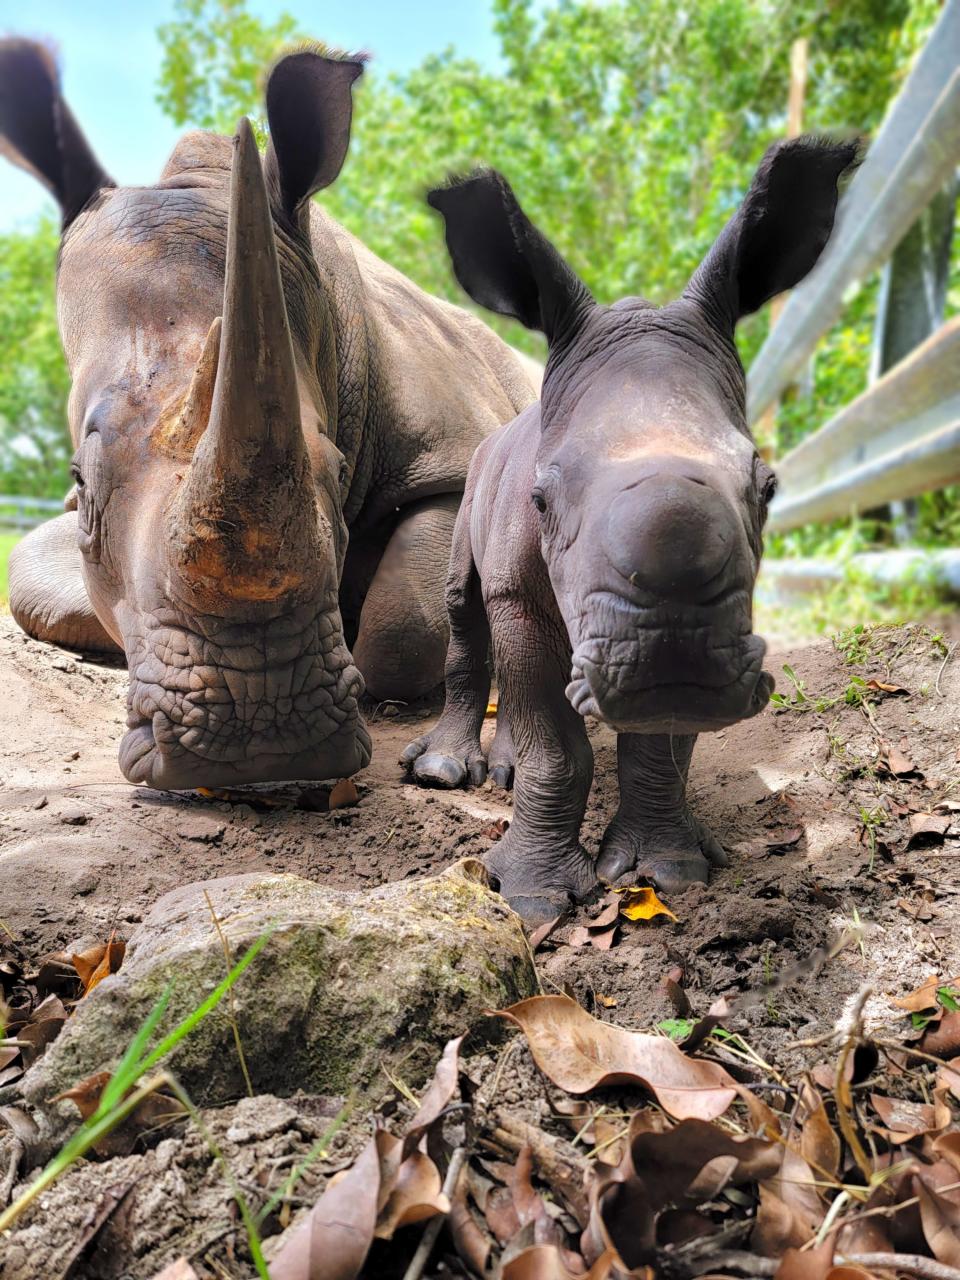 Lion Country Safari in Loxahatchee welcomed Ruby (right), a southern white rhinoceros, on Saturday, Aug. 6, 2022. She is the third rhino calf born at the animal park in the past year. With her is her mother, Blossom, a 7-year-old southern white rhinoceros.